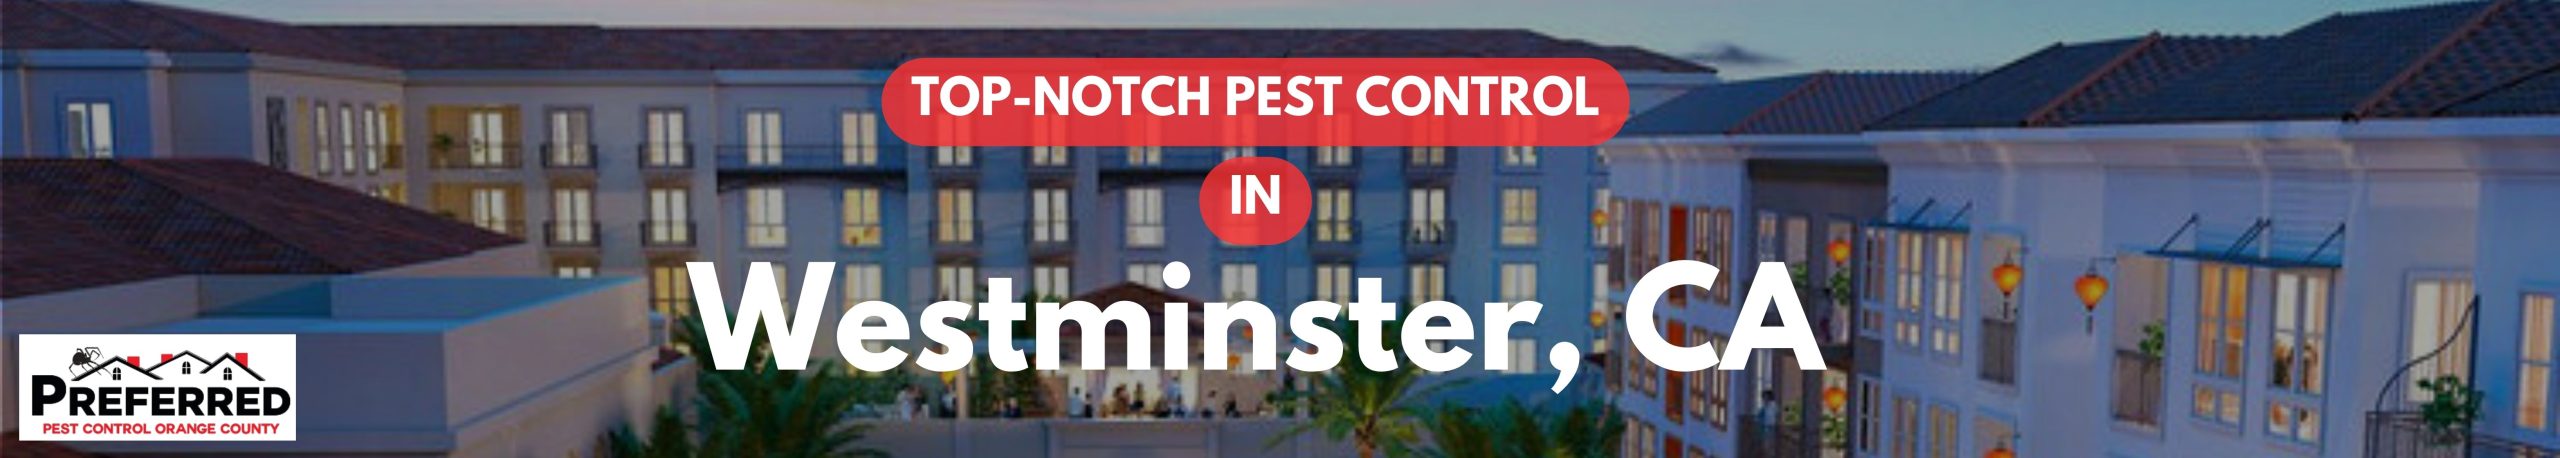 pest control in Westminster, CA